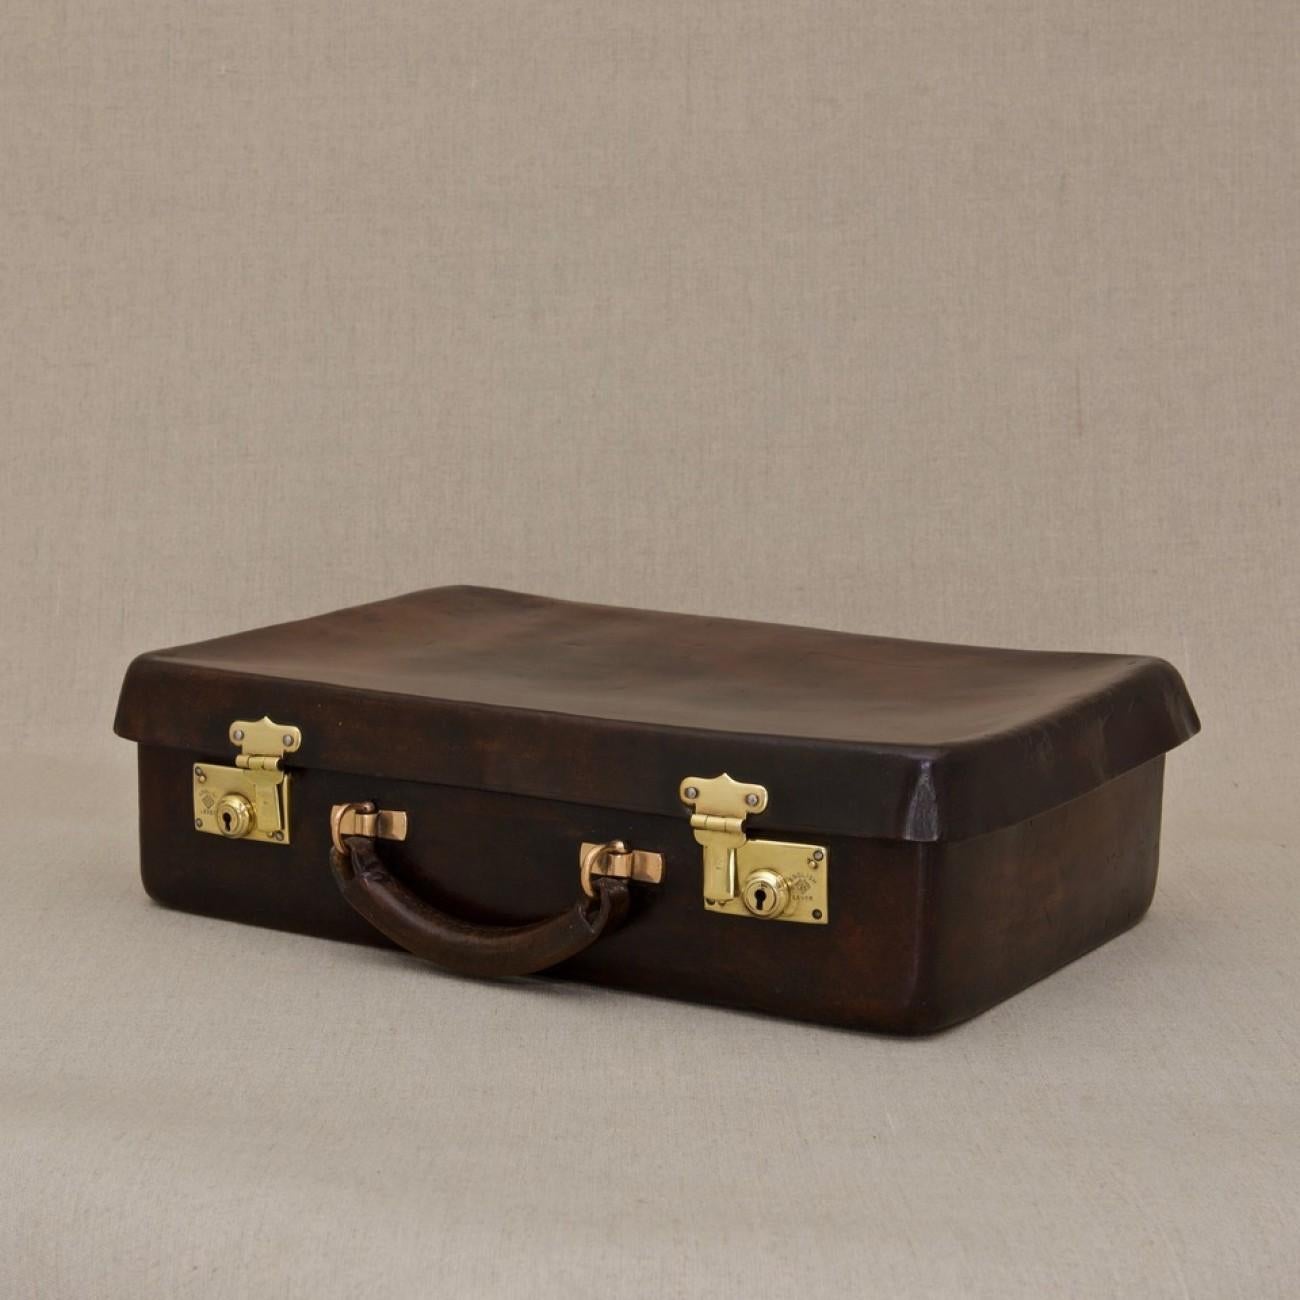 Splendid patinated dark tan leather Norfolk hide attaché case, circa 1920. With original leather handle, no initials and original Rexine lining to the interior. Stamped 'Warranted Solid Leather' and 'Ashtona Standard'.

Norfolk hide is one of the